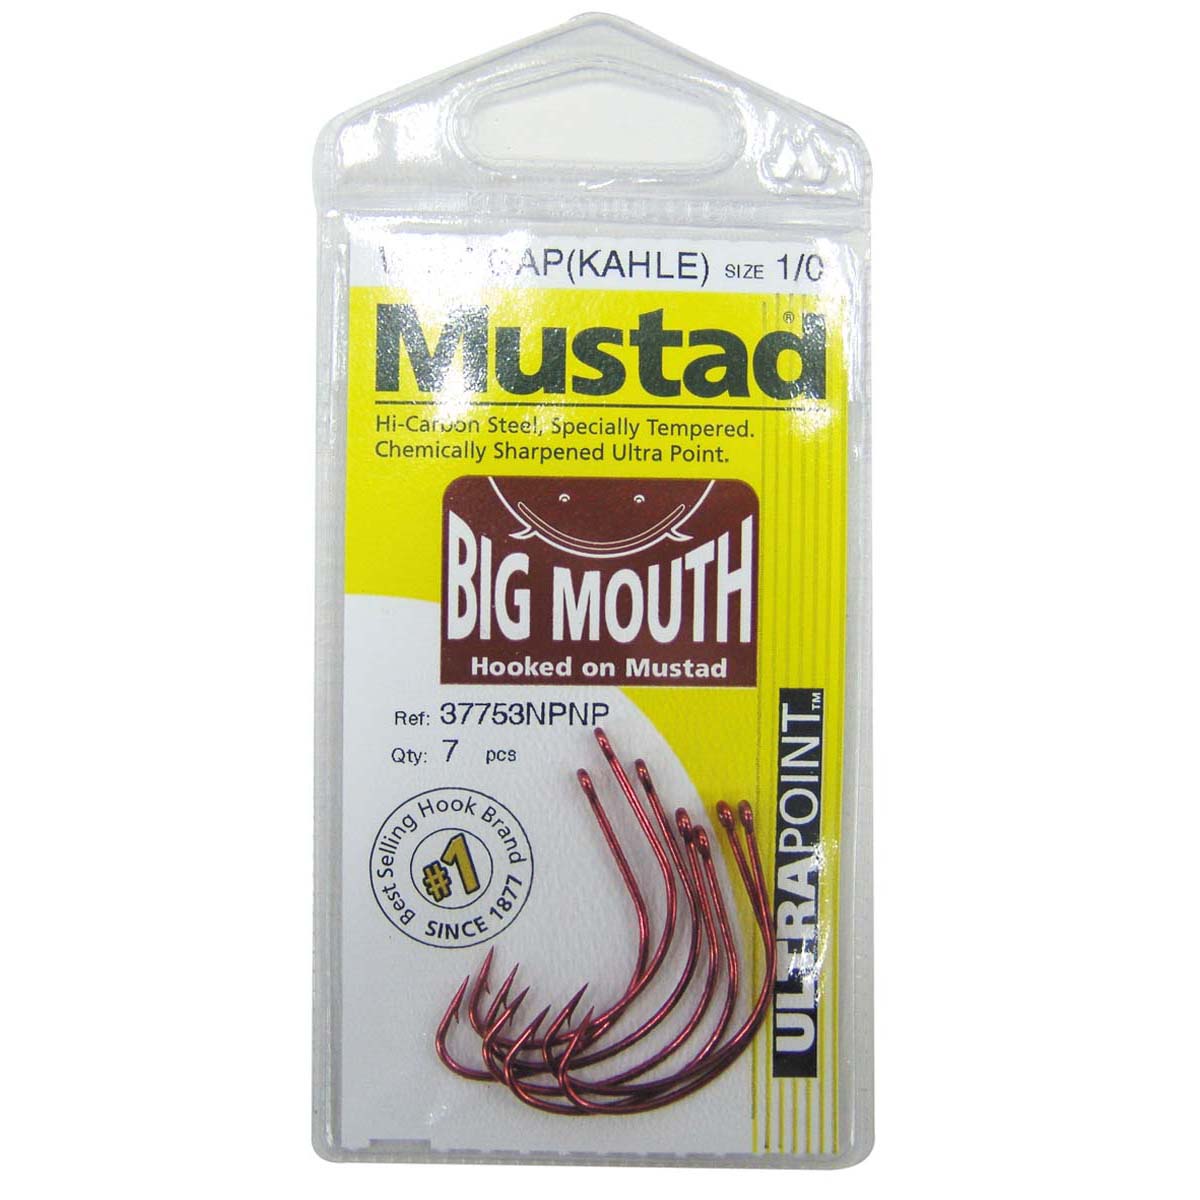 Mustad Big Mouth Hooks 1 7 Pack